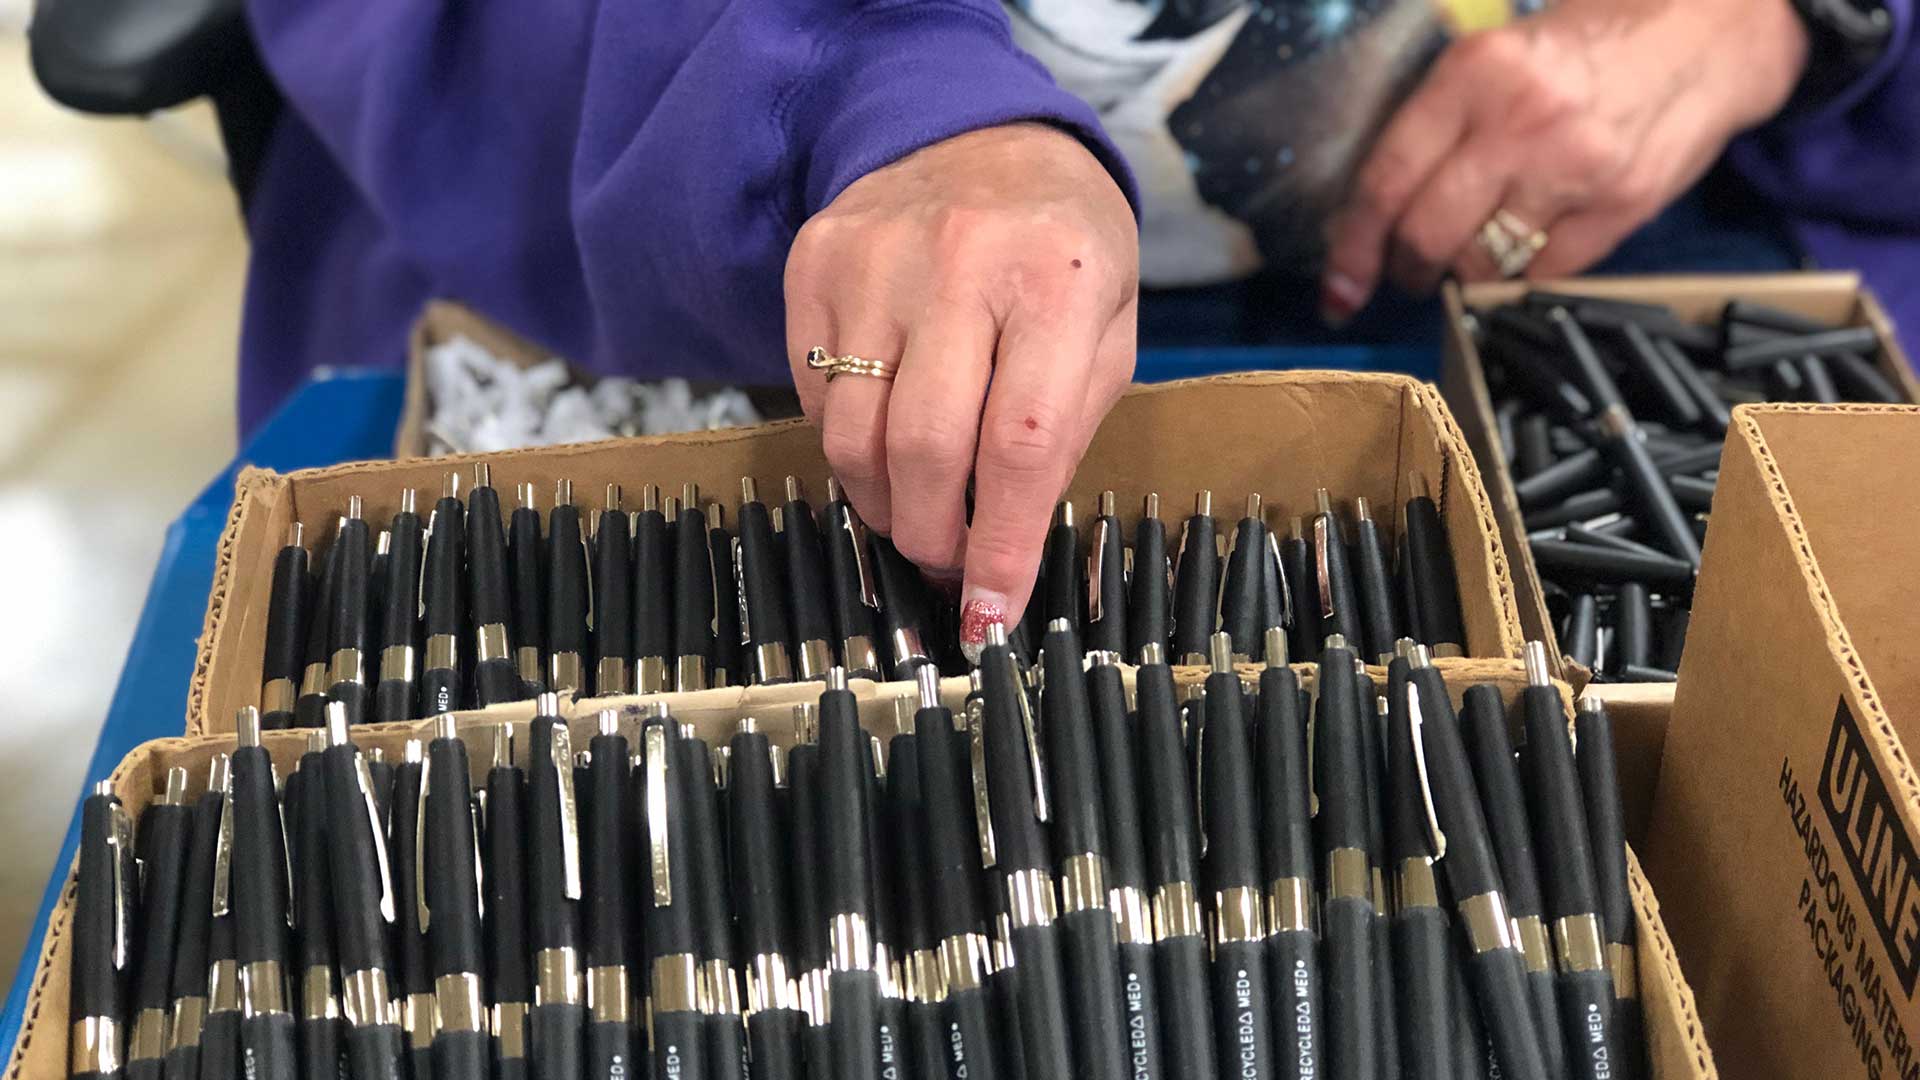 Person organizing pens in a box